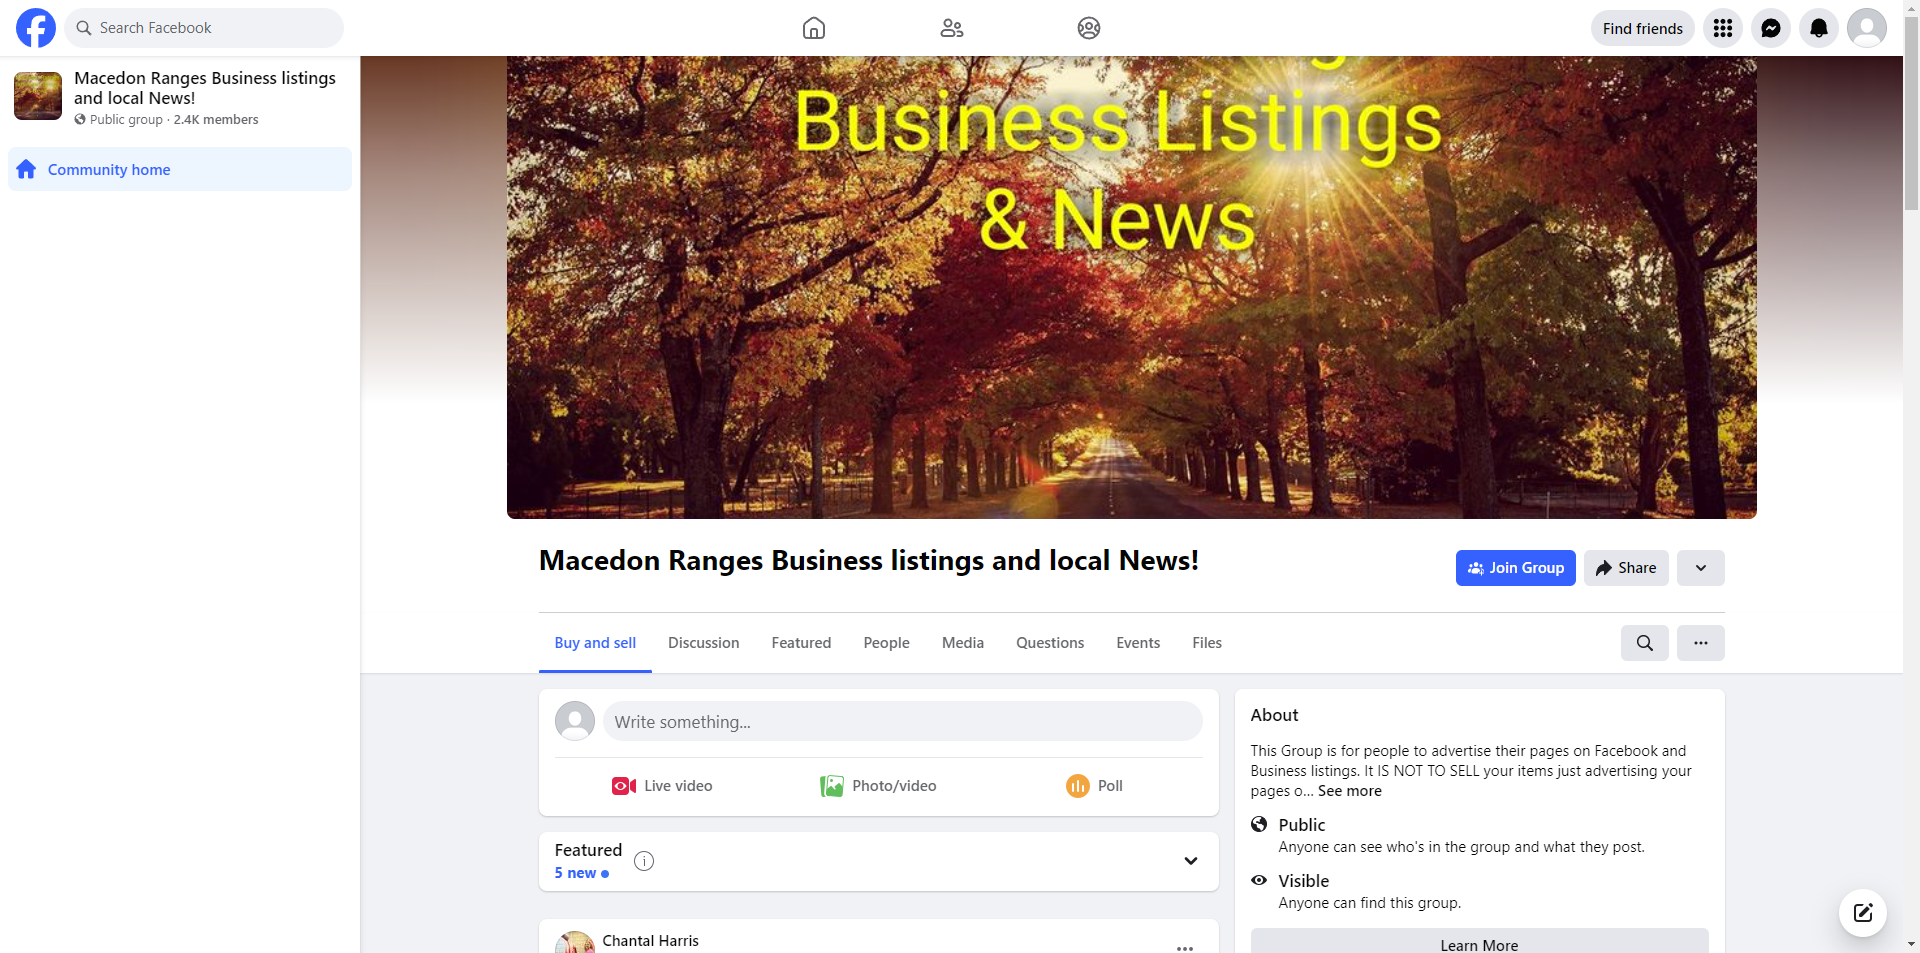 Macedon Ranges Business Listings and Local News!